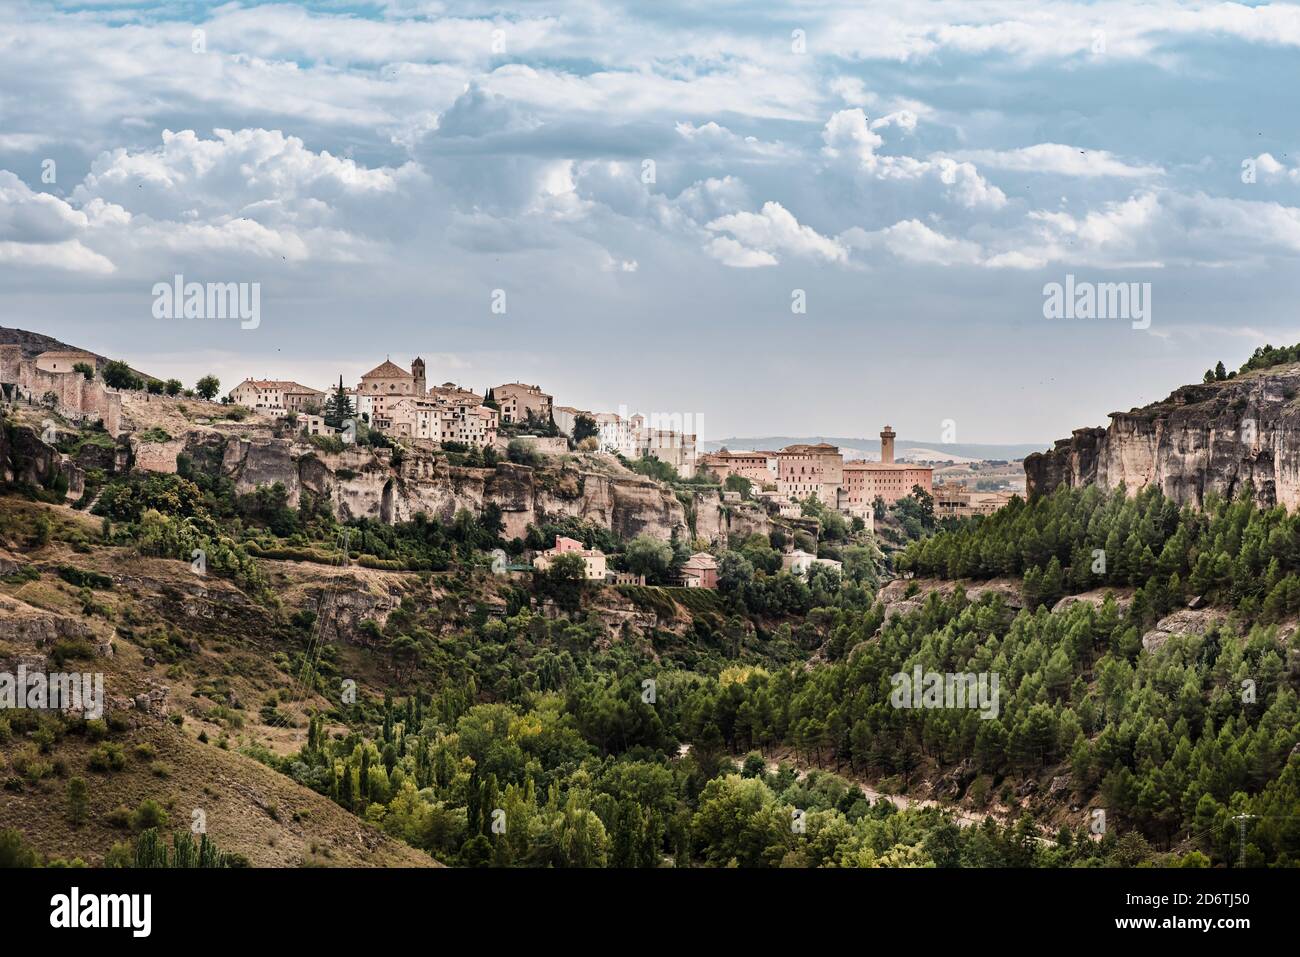 Scenic view of medieval town Cuenca with old stone houses located on hills covered with green trees under blue cloudy sky in summer day in Spain Stock Photo